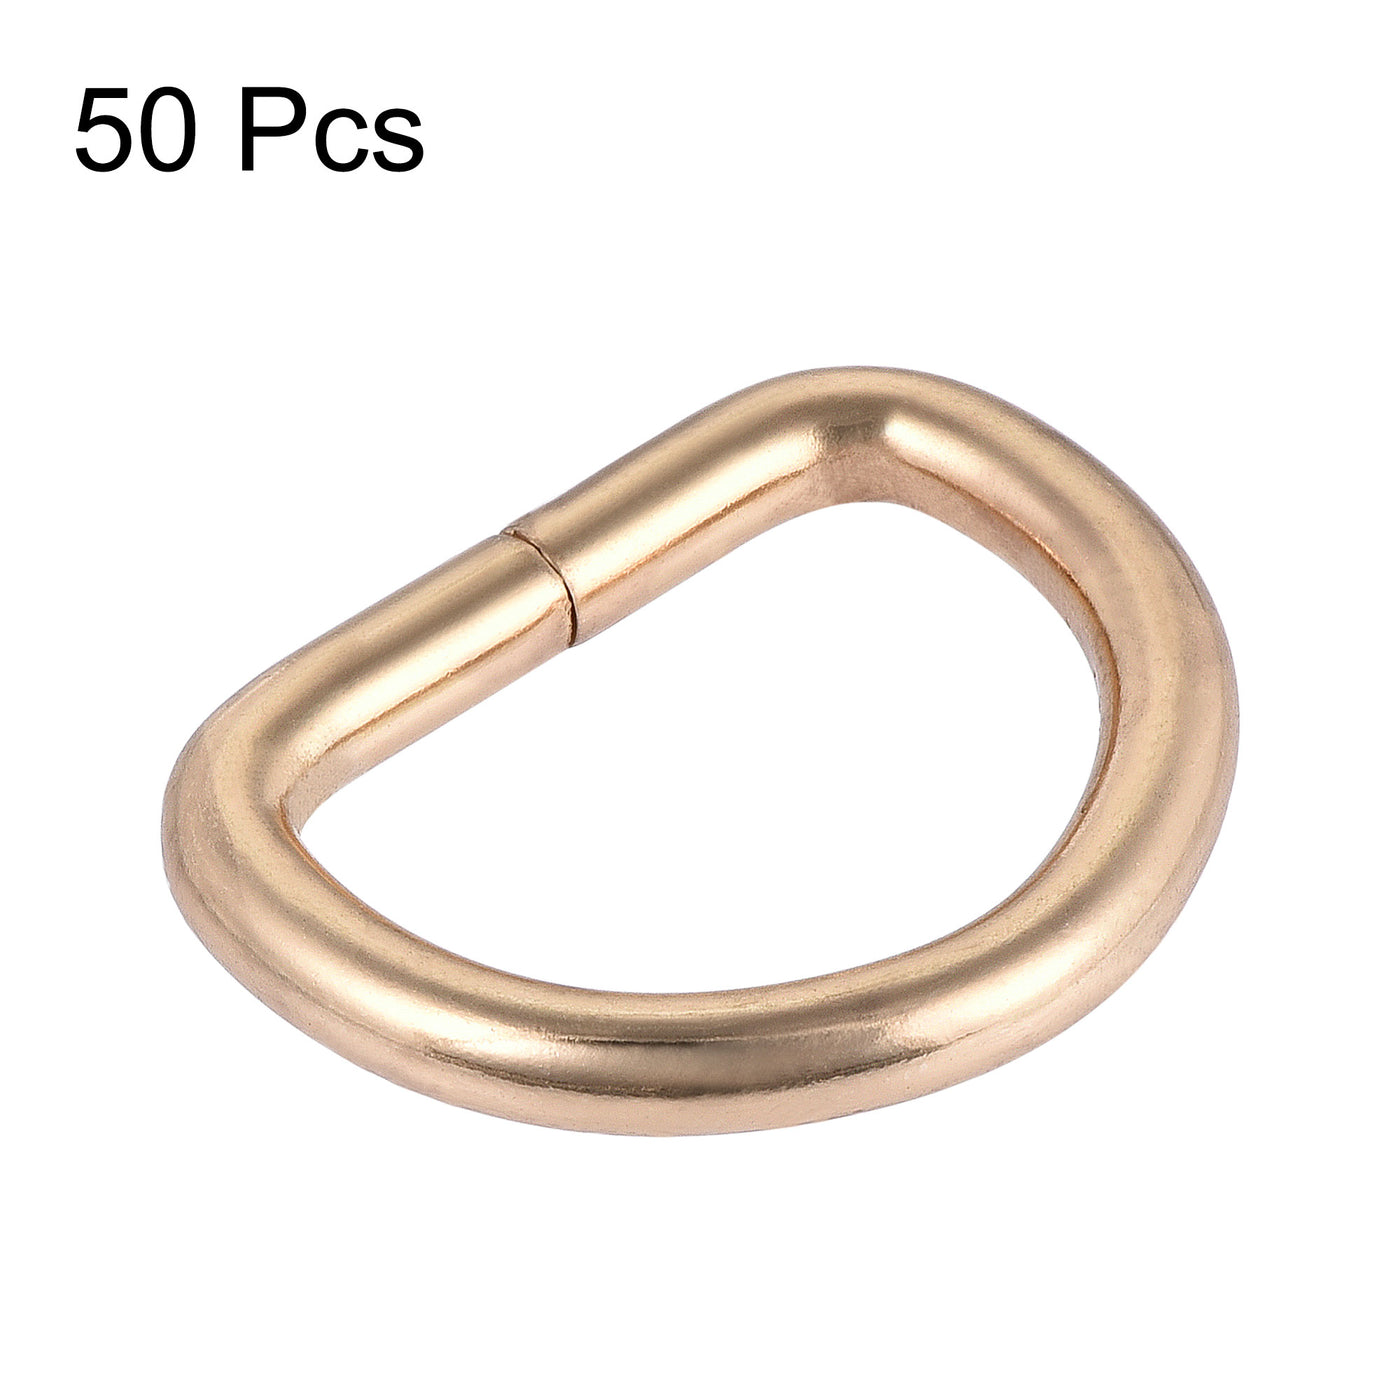 uxcell Uxcell Metal D Ring 0.98"(25mm) D-Rings Buckle for Hardware Bags Belts Craft DIY Accessories Gold Tone 50pcs